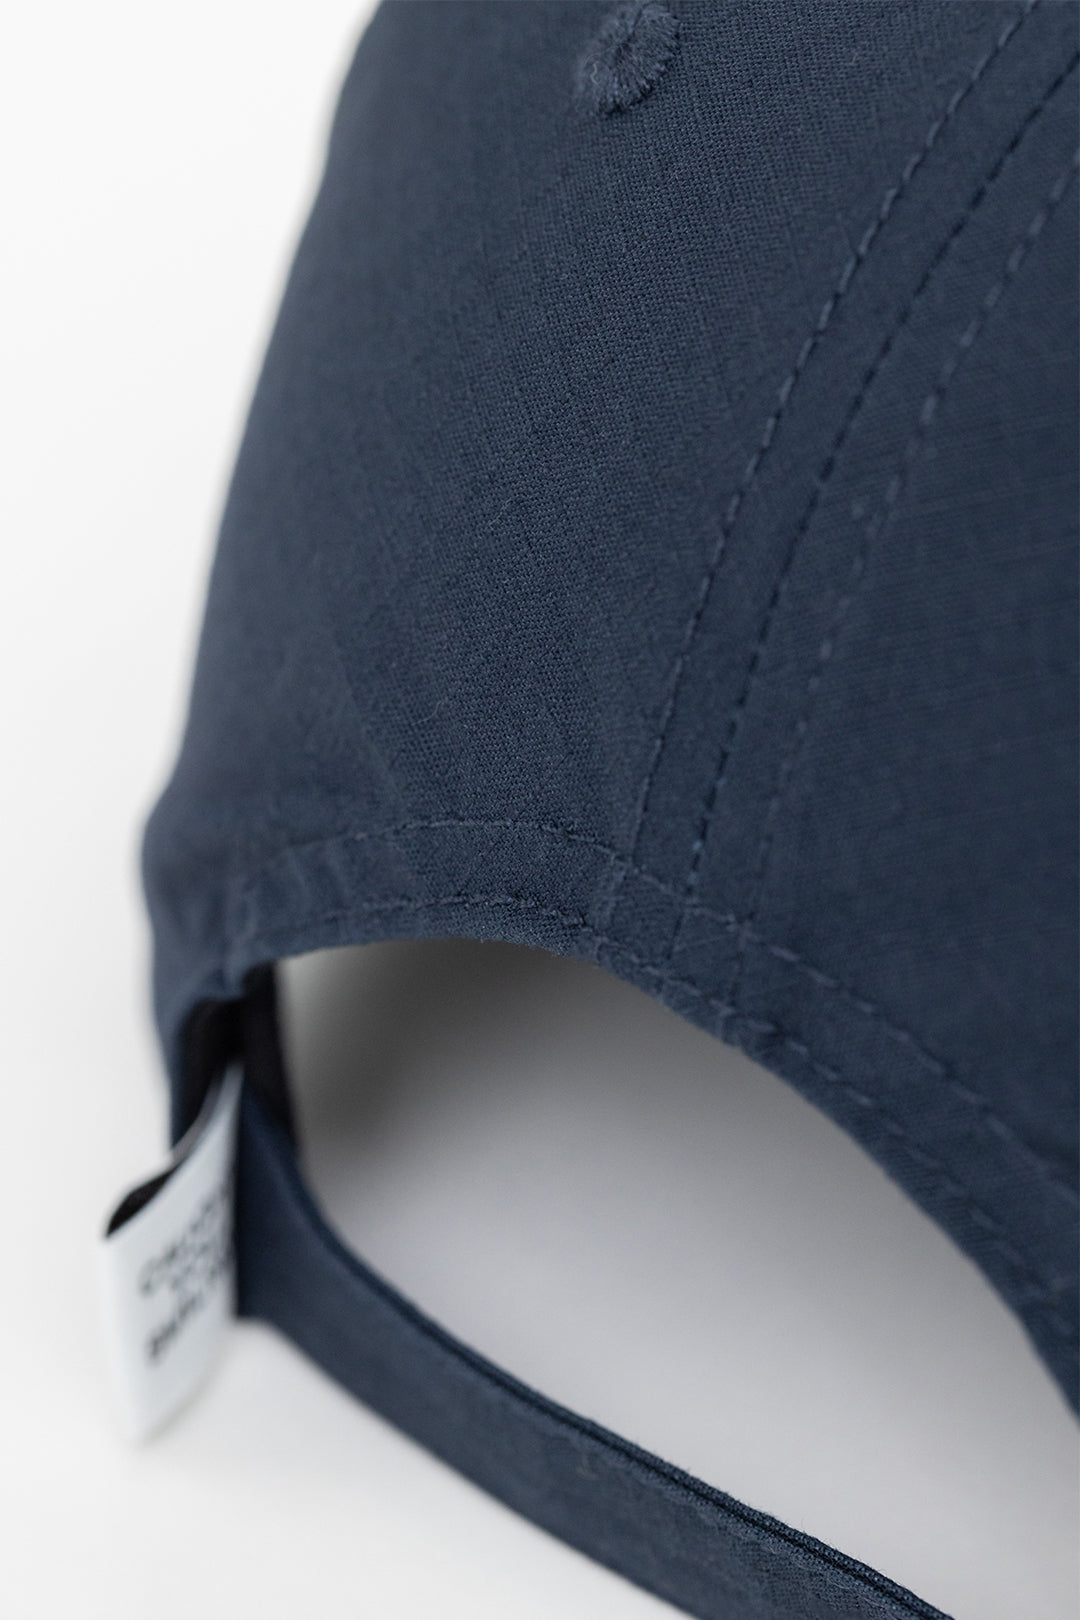 Dark blue floppy cap made of organic cotton from Rotholz